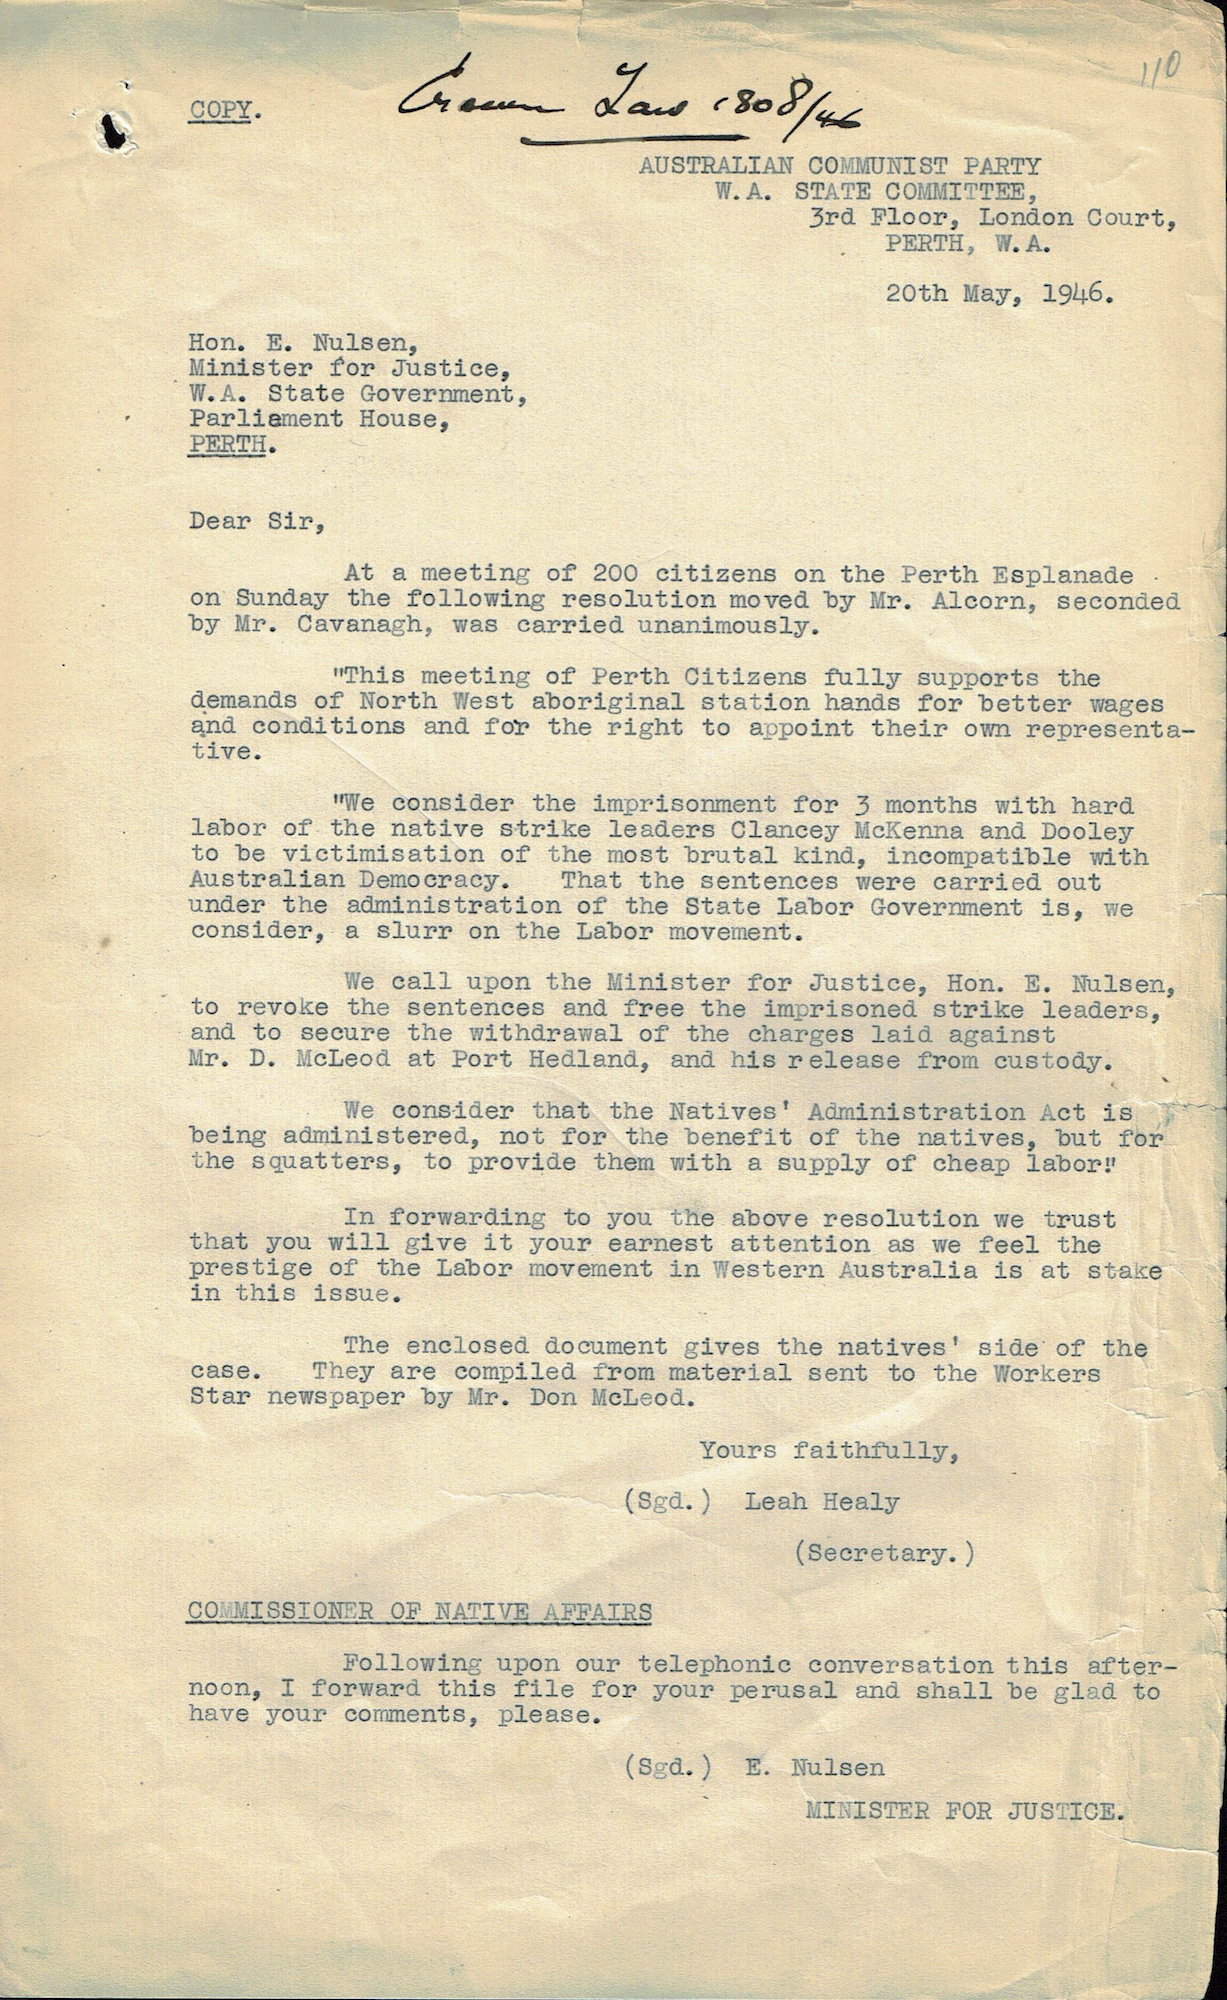 Leah Healy, Secretary, Western Australian State Committee, Australian Communist Party, to Minister for Justice Emil Nulsen, 20 May 1946